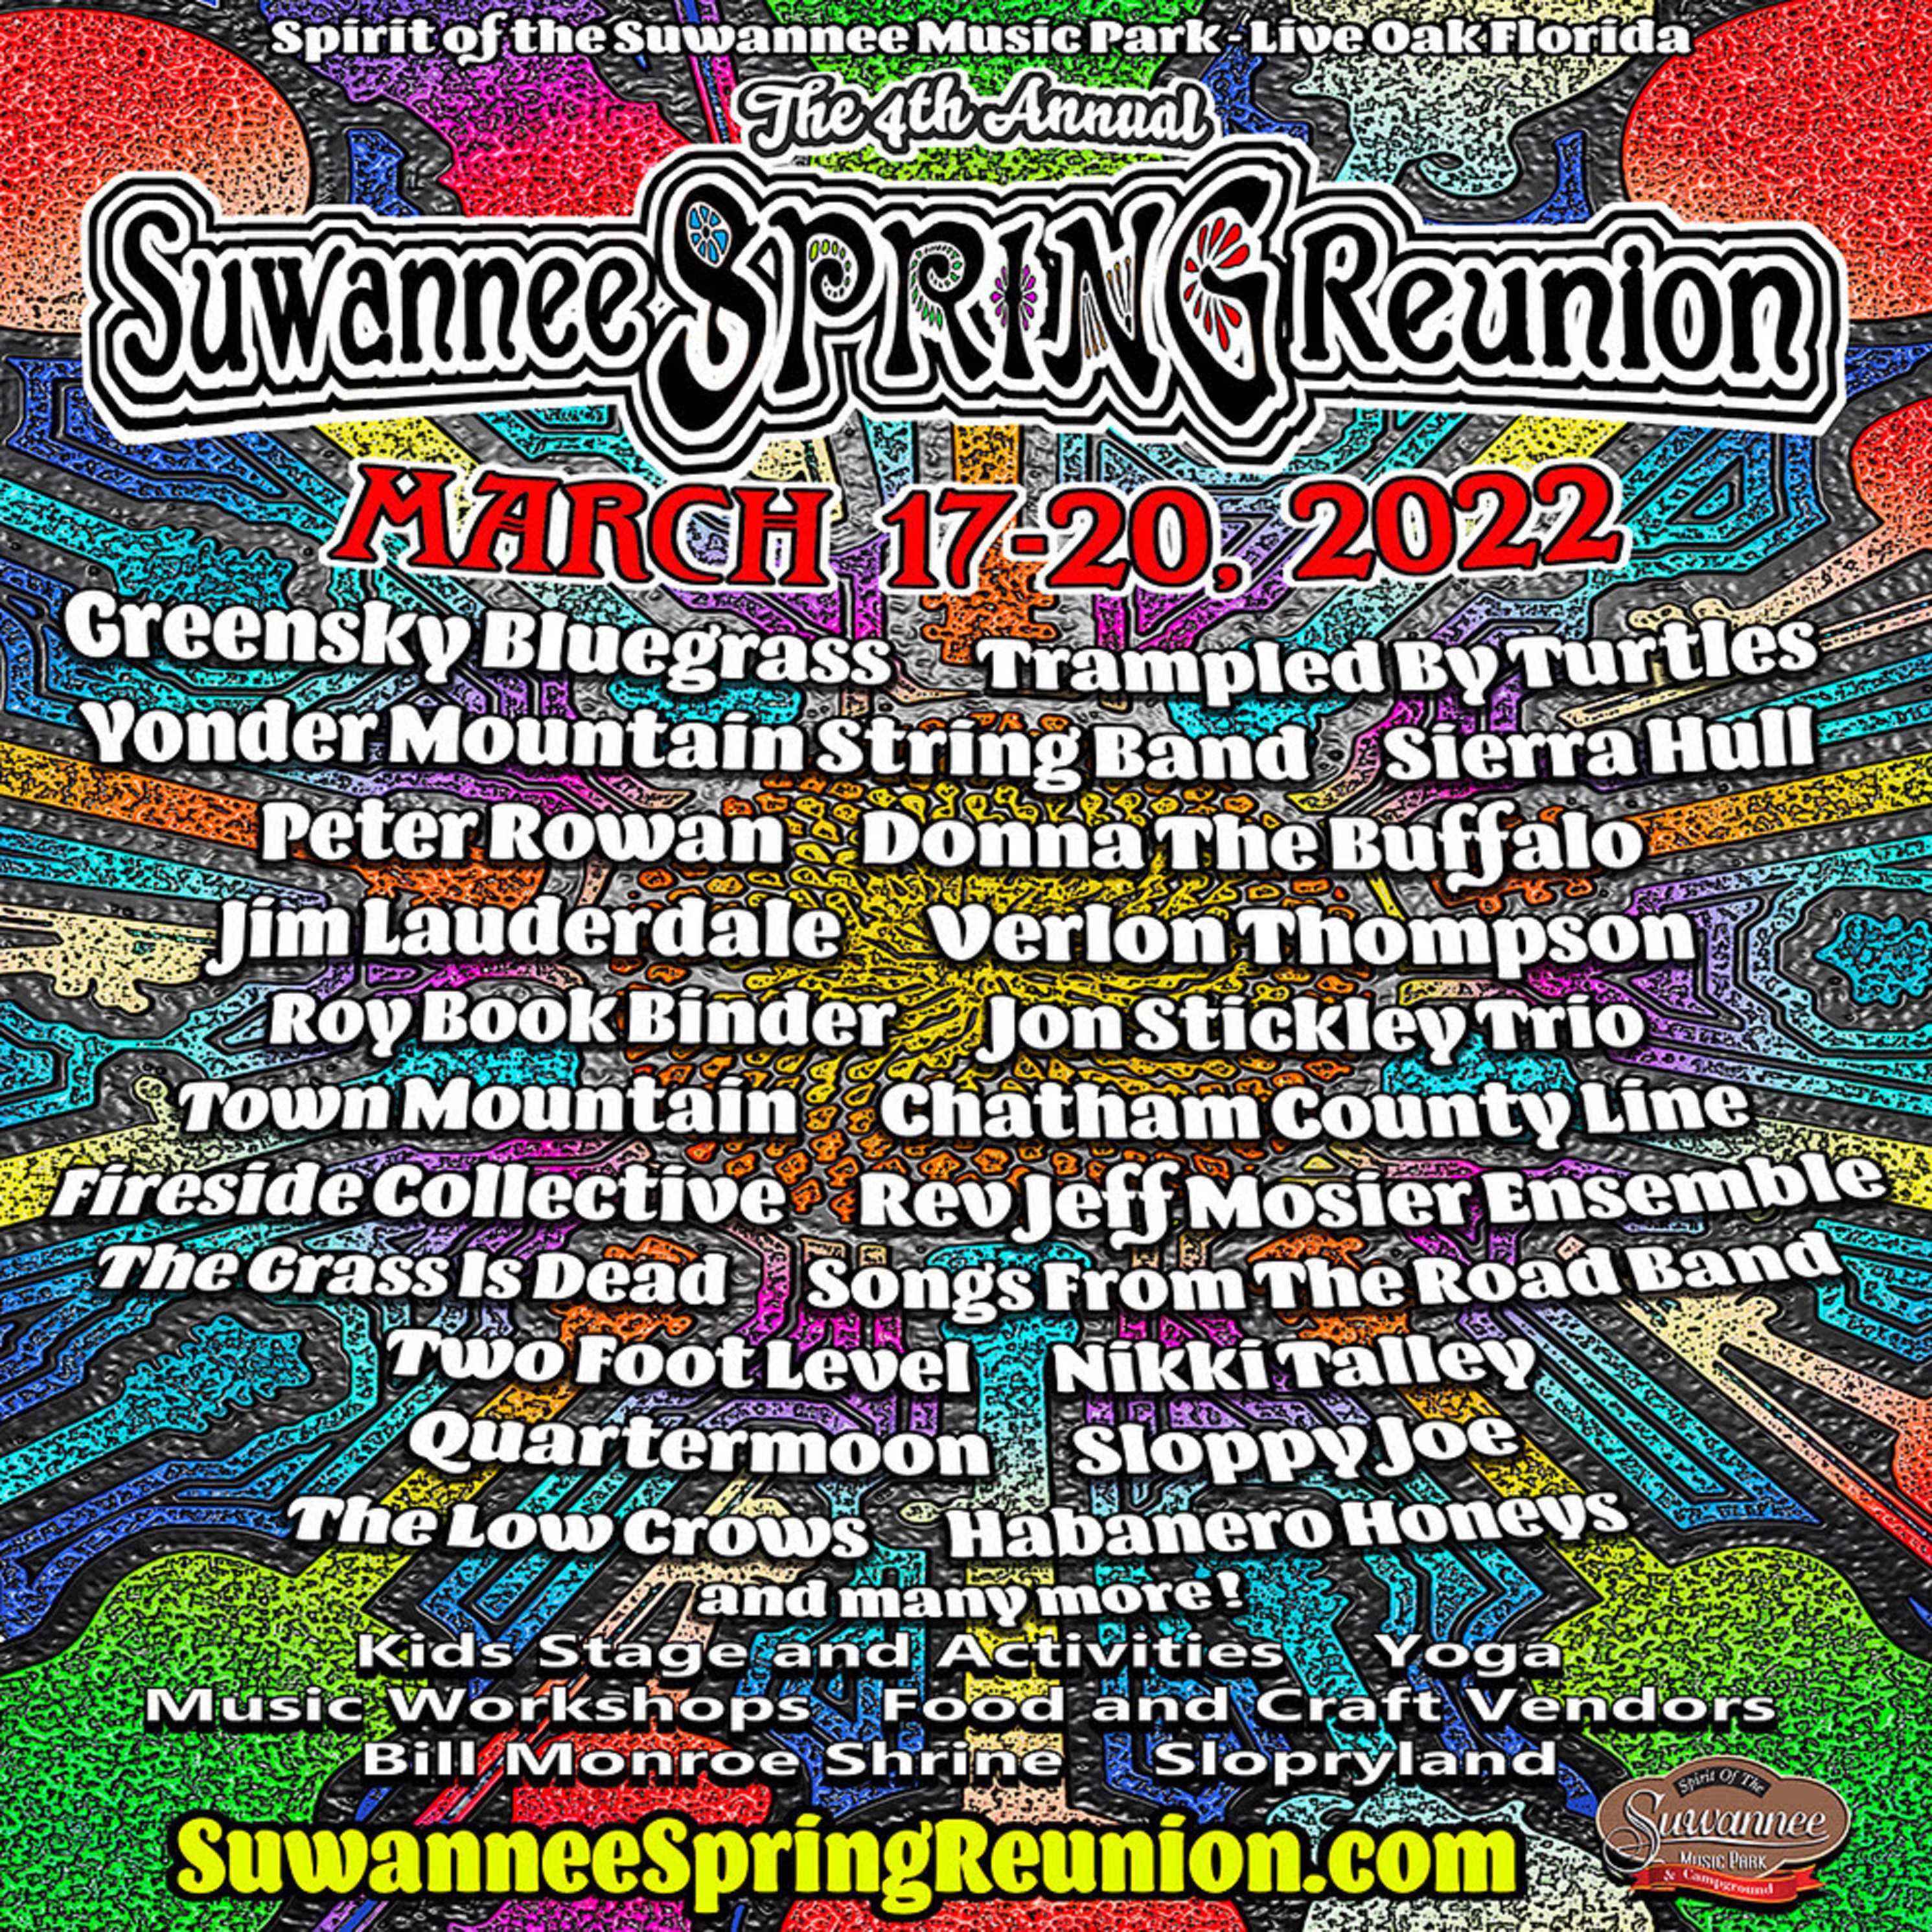 Suwannee Spring Reunion March 17-20, 2022 w/ Greensky Bluegrass, Trampled By Turtles, Yonder Mountain String Band, Sierra Hull, Peter Rowan & more